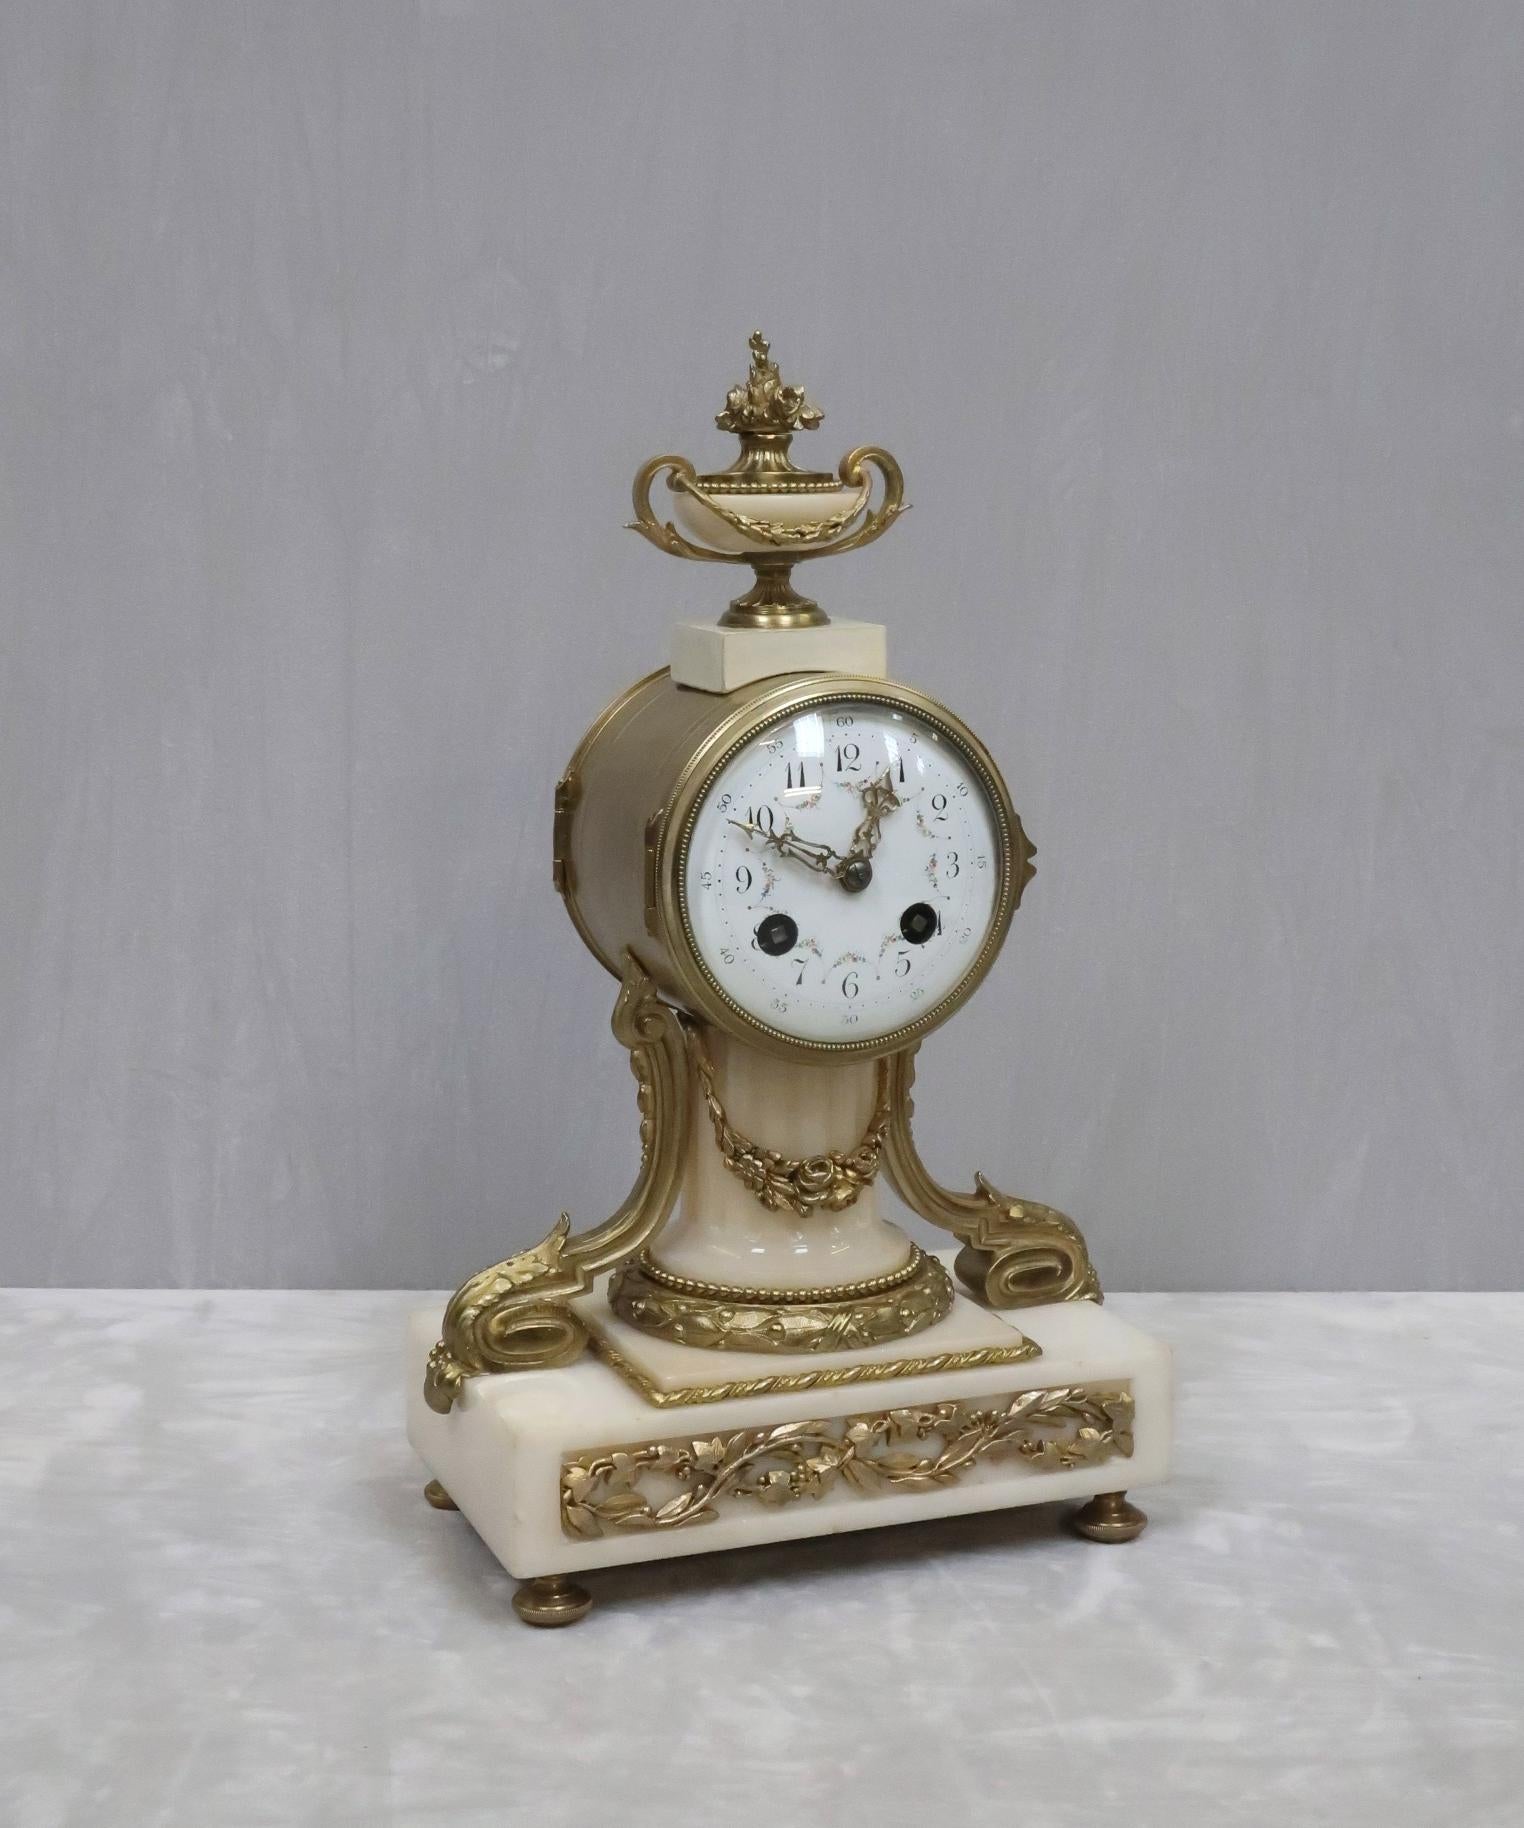 A very good quality French white marble mantel clock with fluted central column, bronze gilt inset entwining vine leaf decoration, floral swag and decorative mouldings finished with a floral urn to the top. The clock has a delicately hand painted